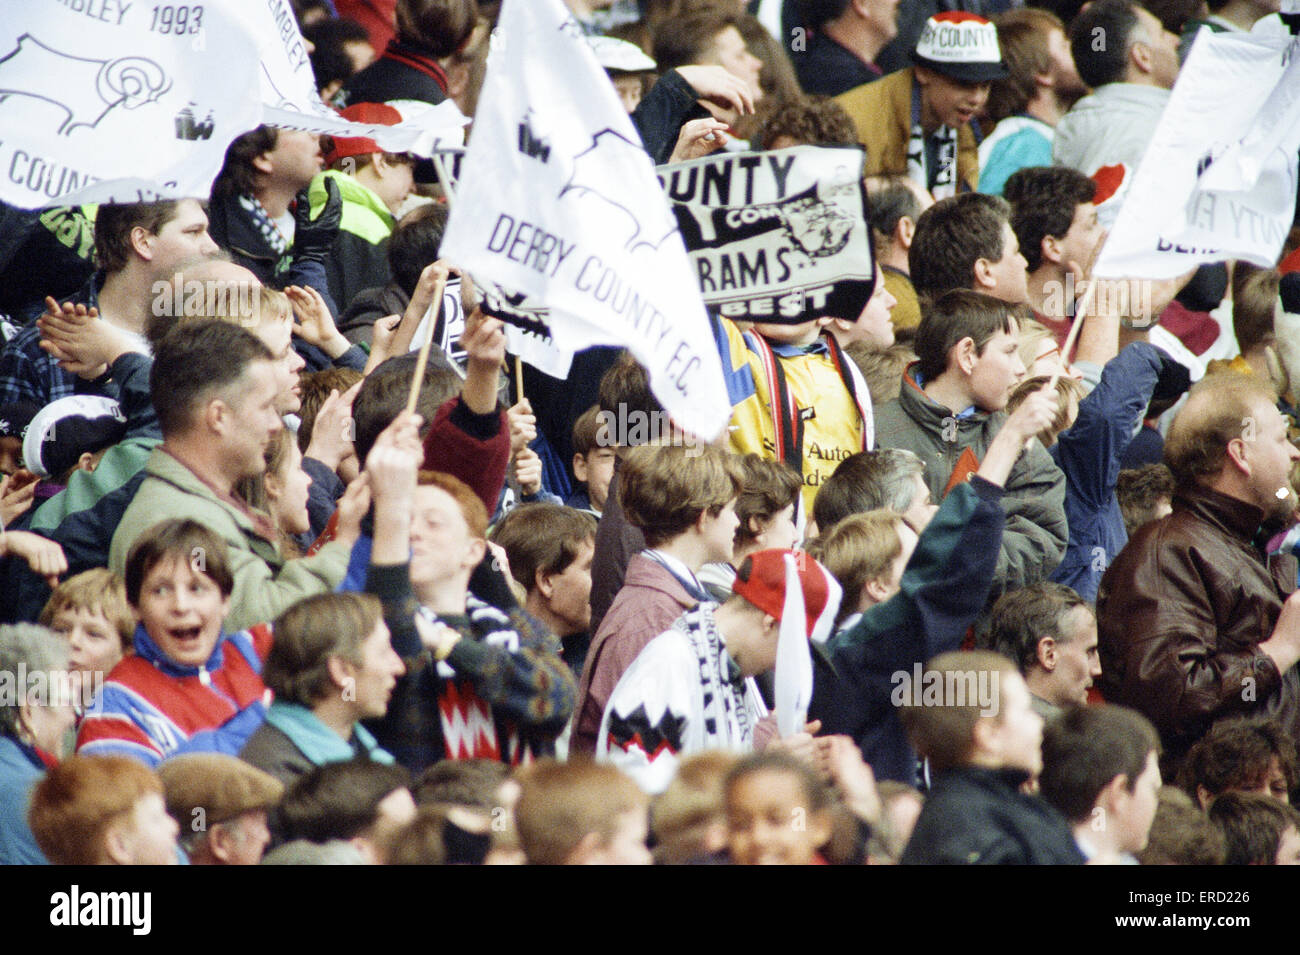 Anglo Italian Cup Final at Wembley Stadium. Derby County  1 v Cremonese 3. Derby fans crammed into Wembley for their first visit since 1975.  27th March 1993. Stock Photo